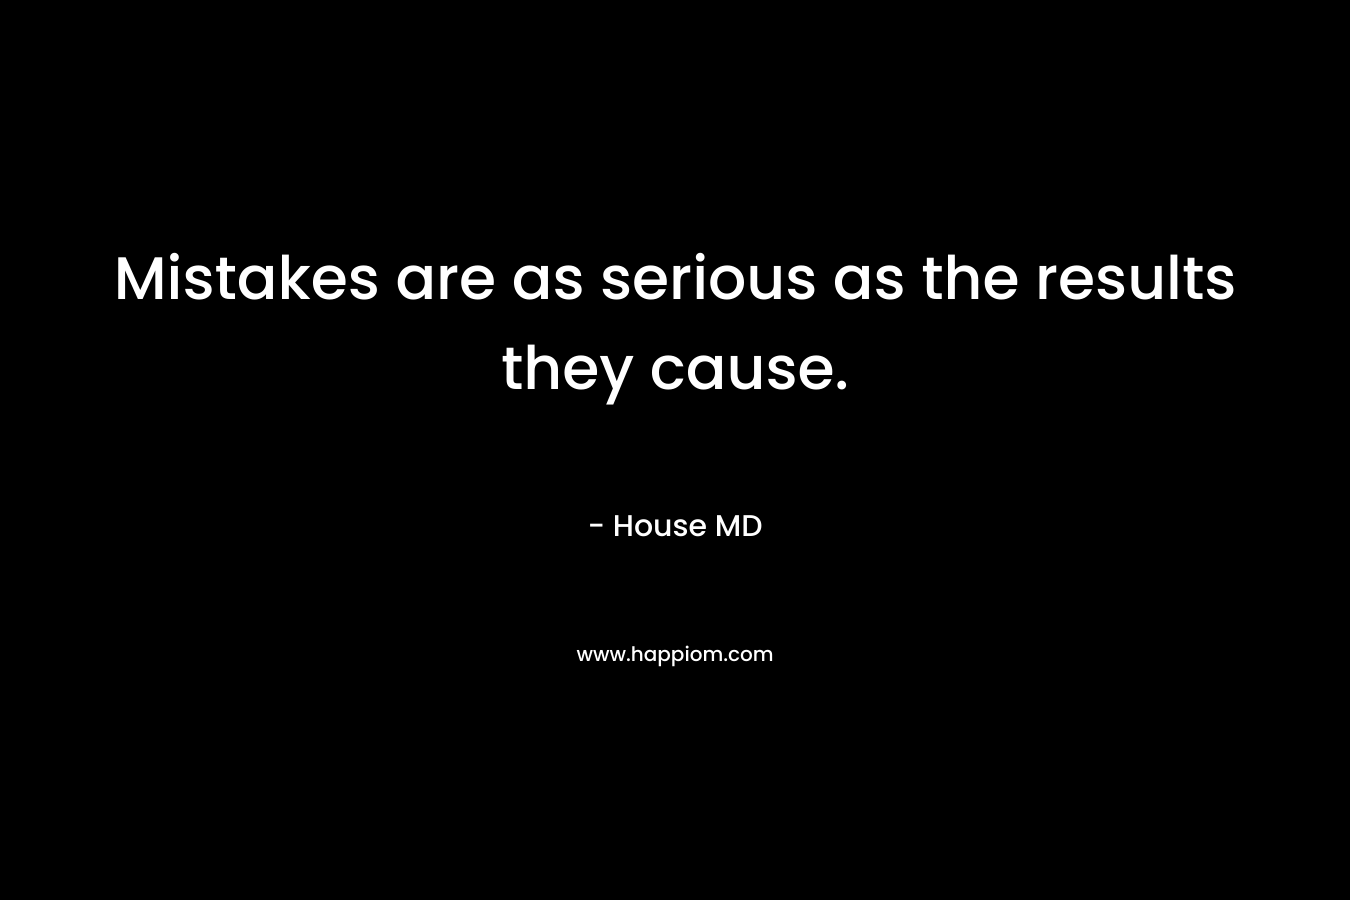 Mistakes are as serious as the results they cause. – House MD